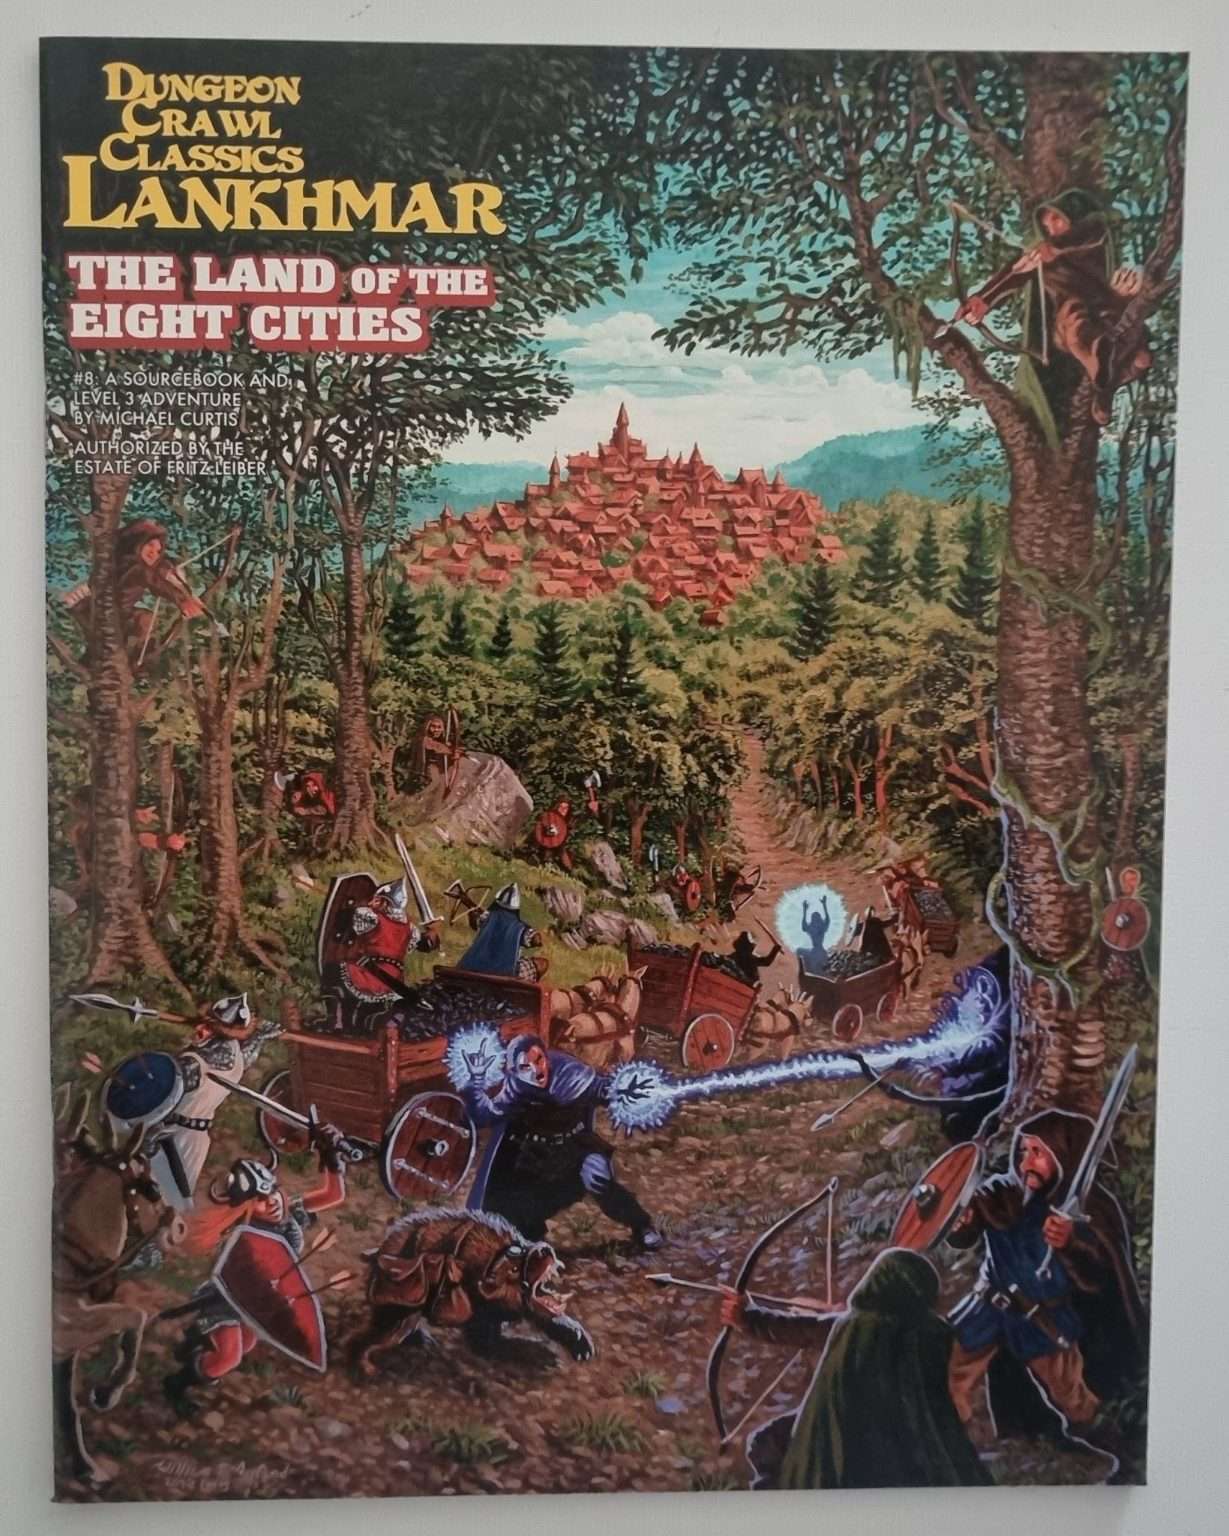 Dungeon Crawl Classics Lankhmar: The Land of the Eight Cities #8 Default Title